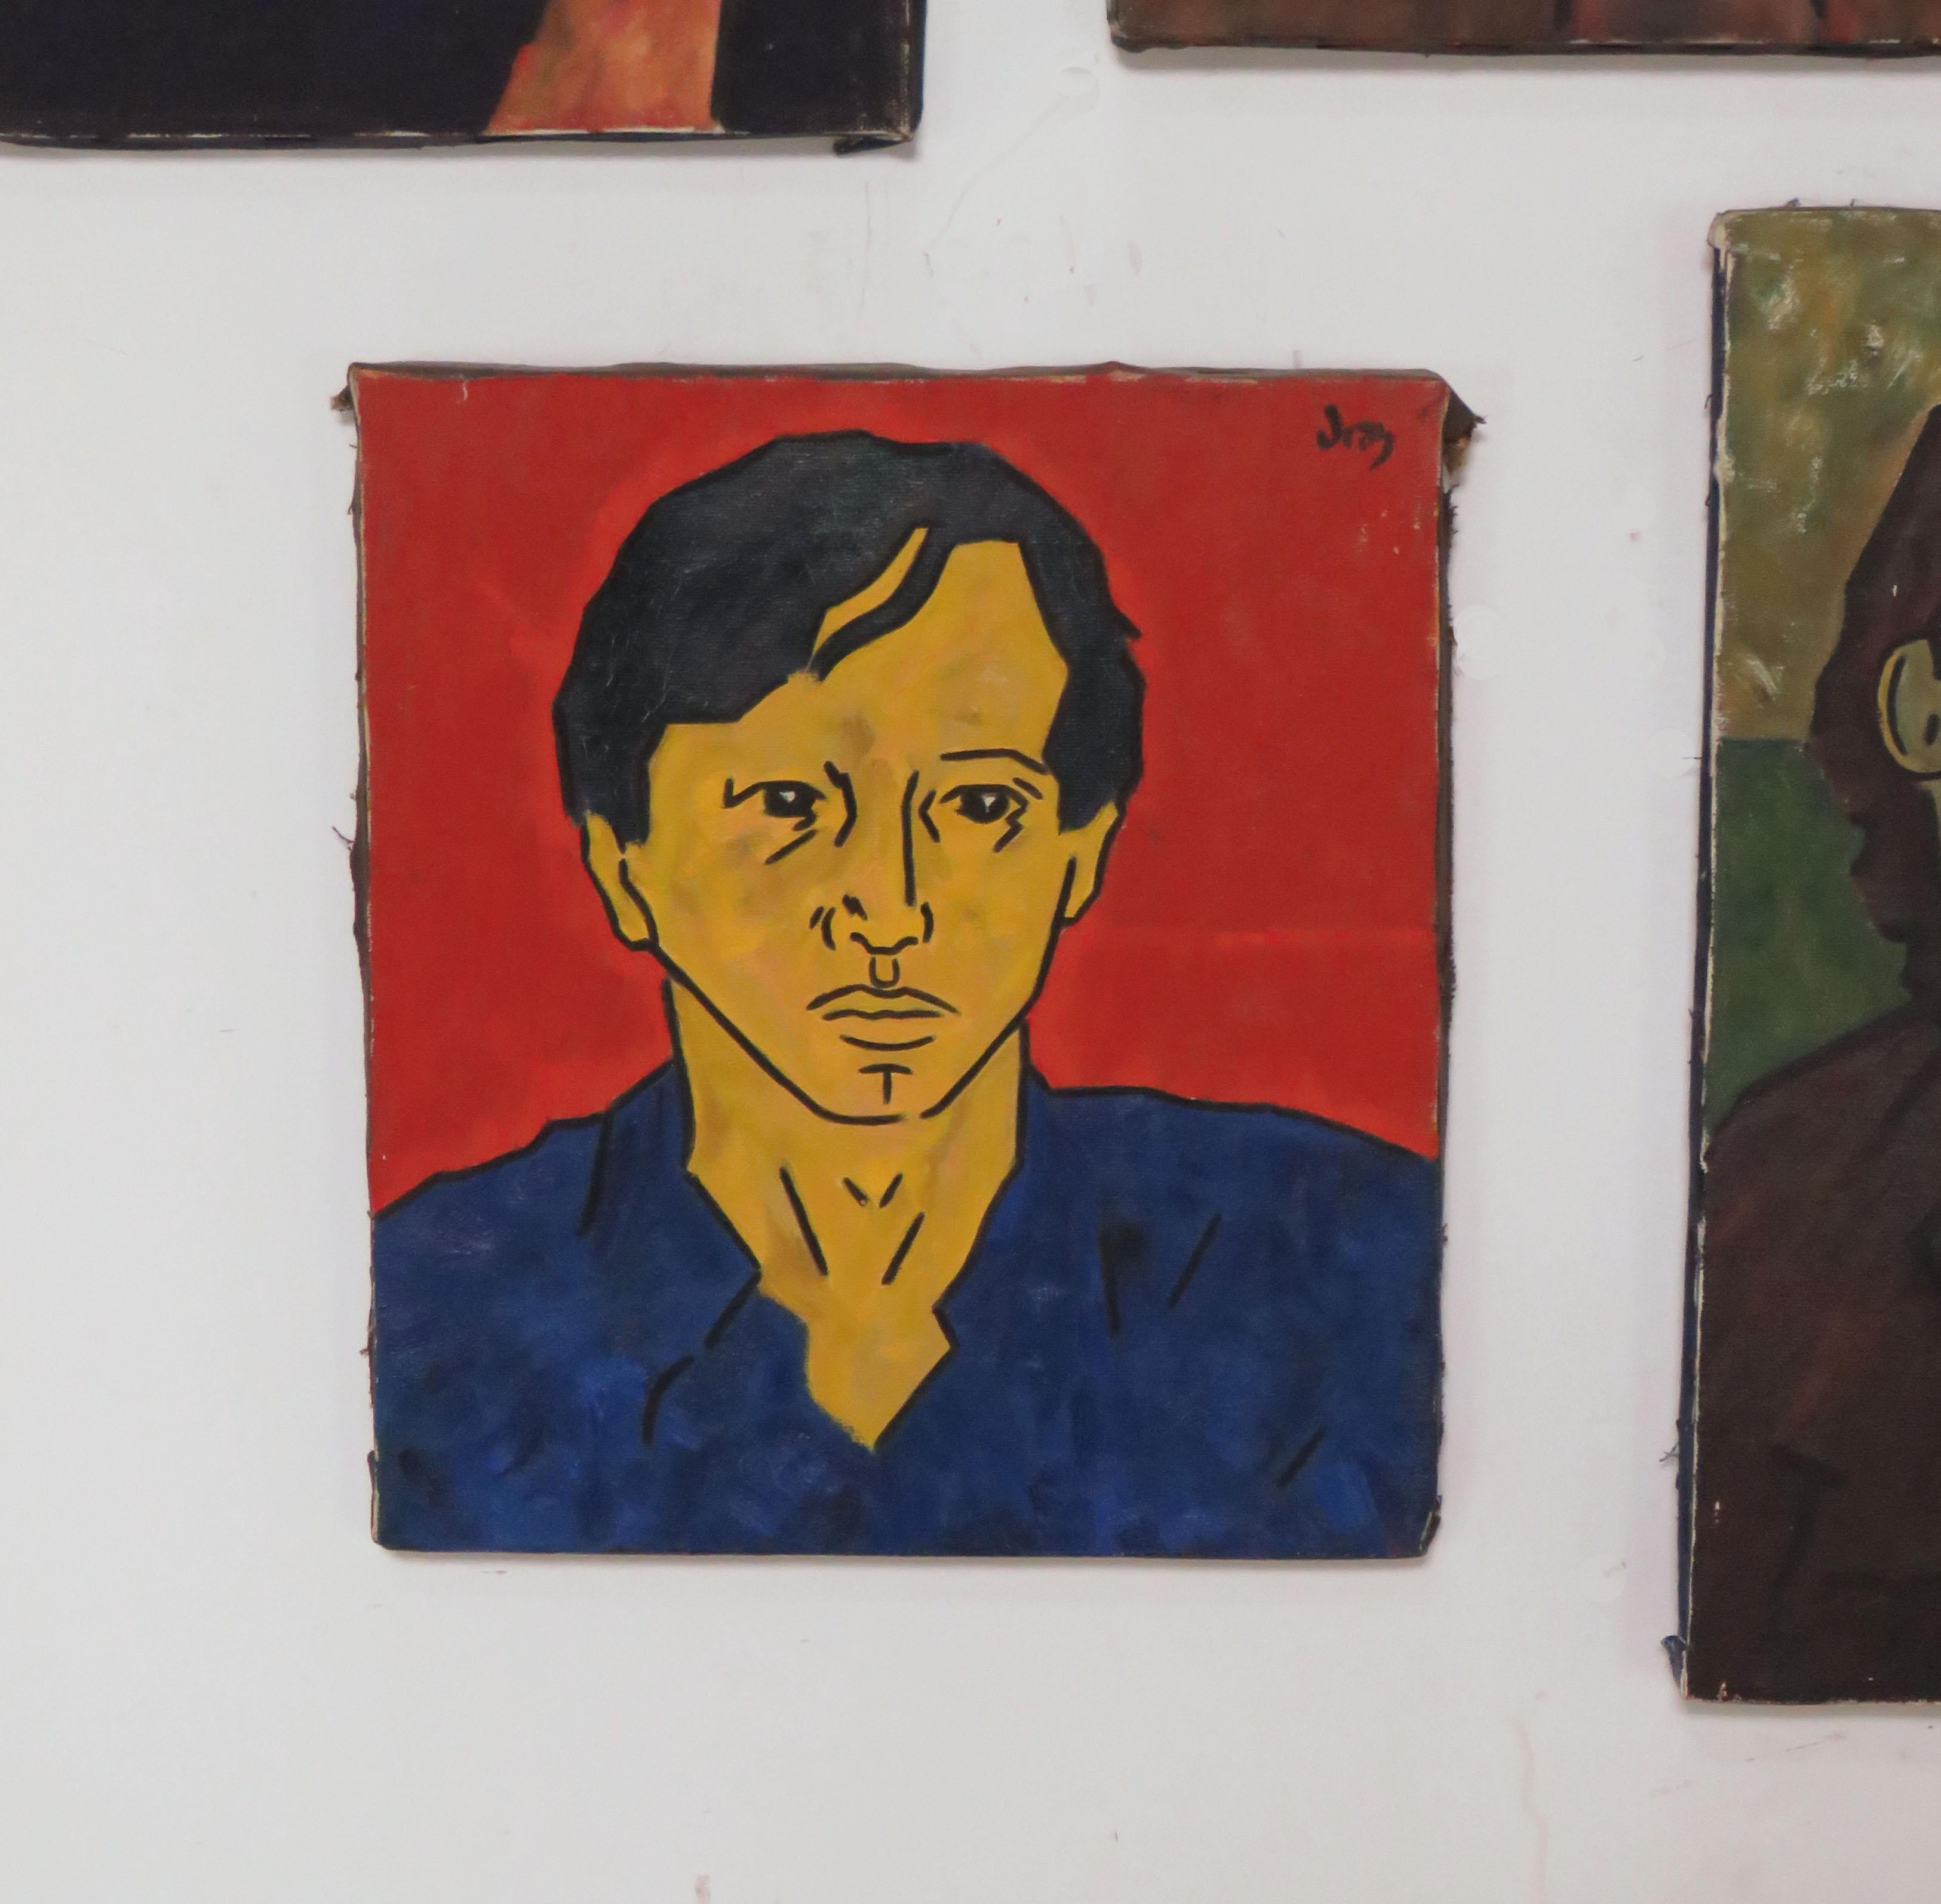 A cluster of original pop art era paintings dated 1973 by New York artist Richard Dean portray the painter and his friends, and include a portrait of the expressionist Willem de Kooning. Almost as fascinating as these “Beatles” inspired head studies